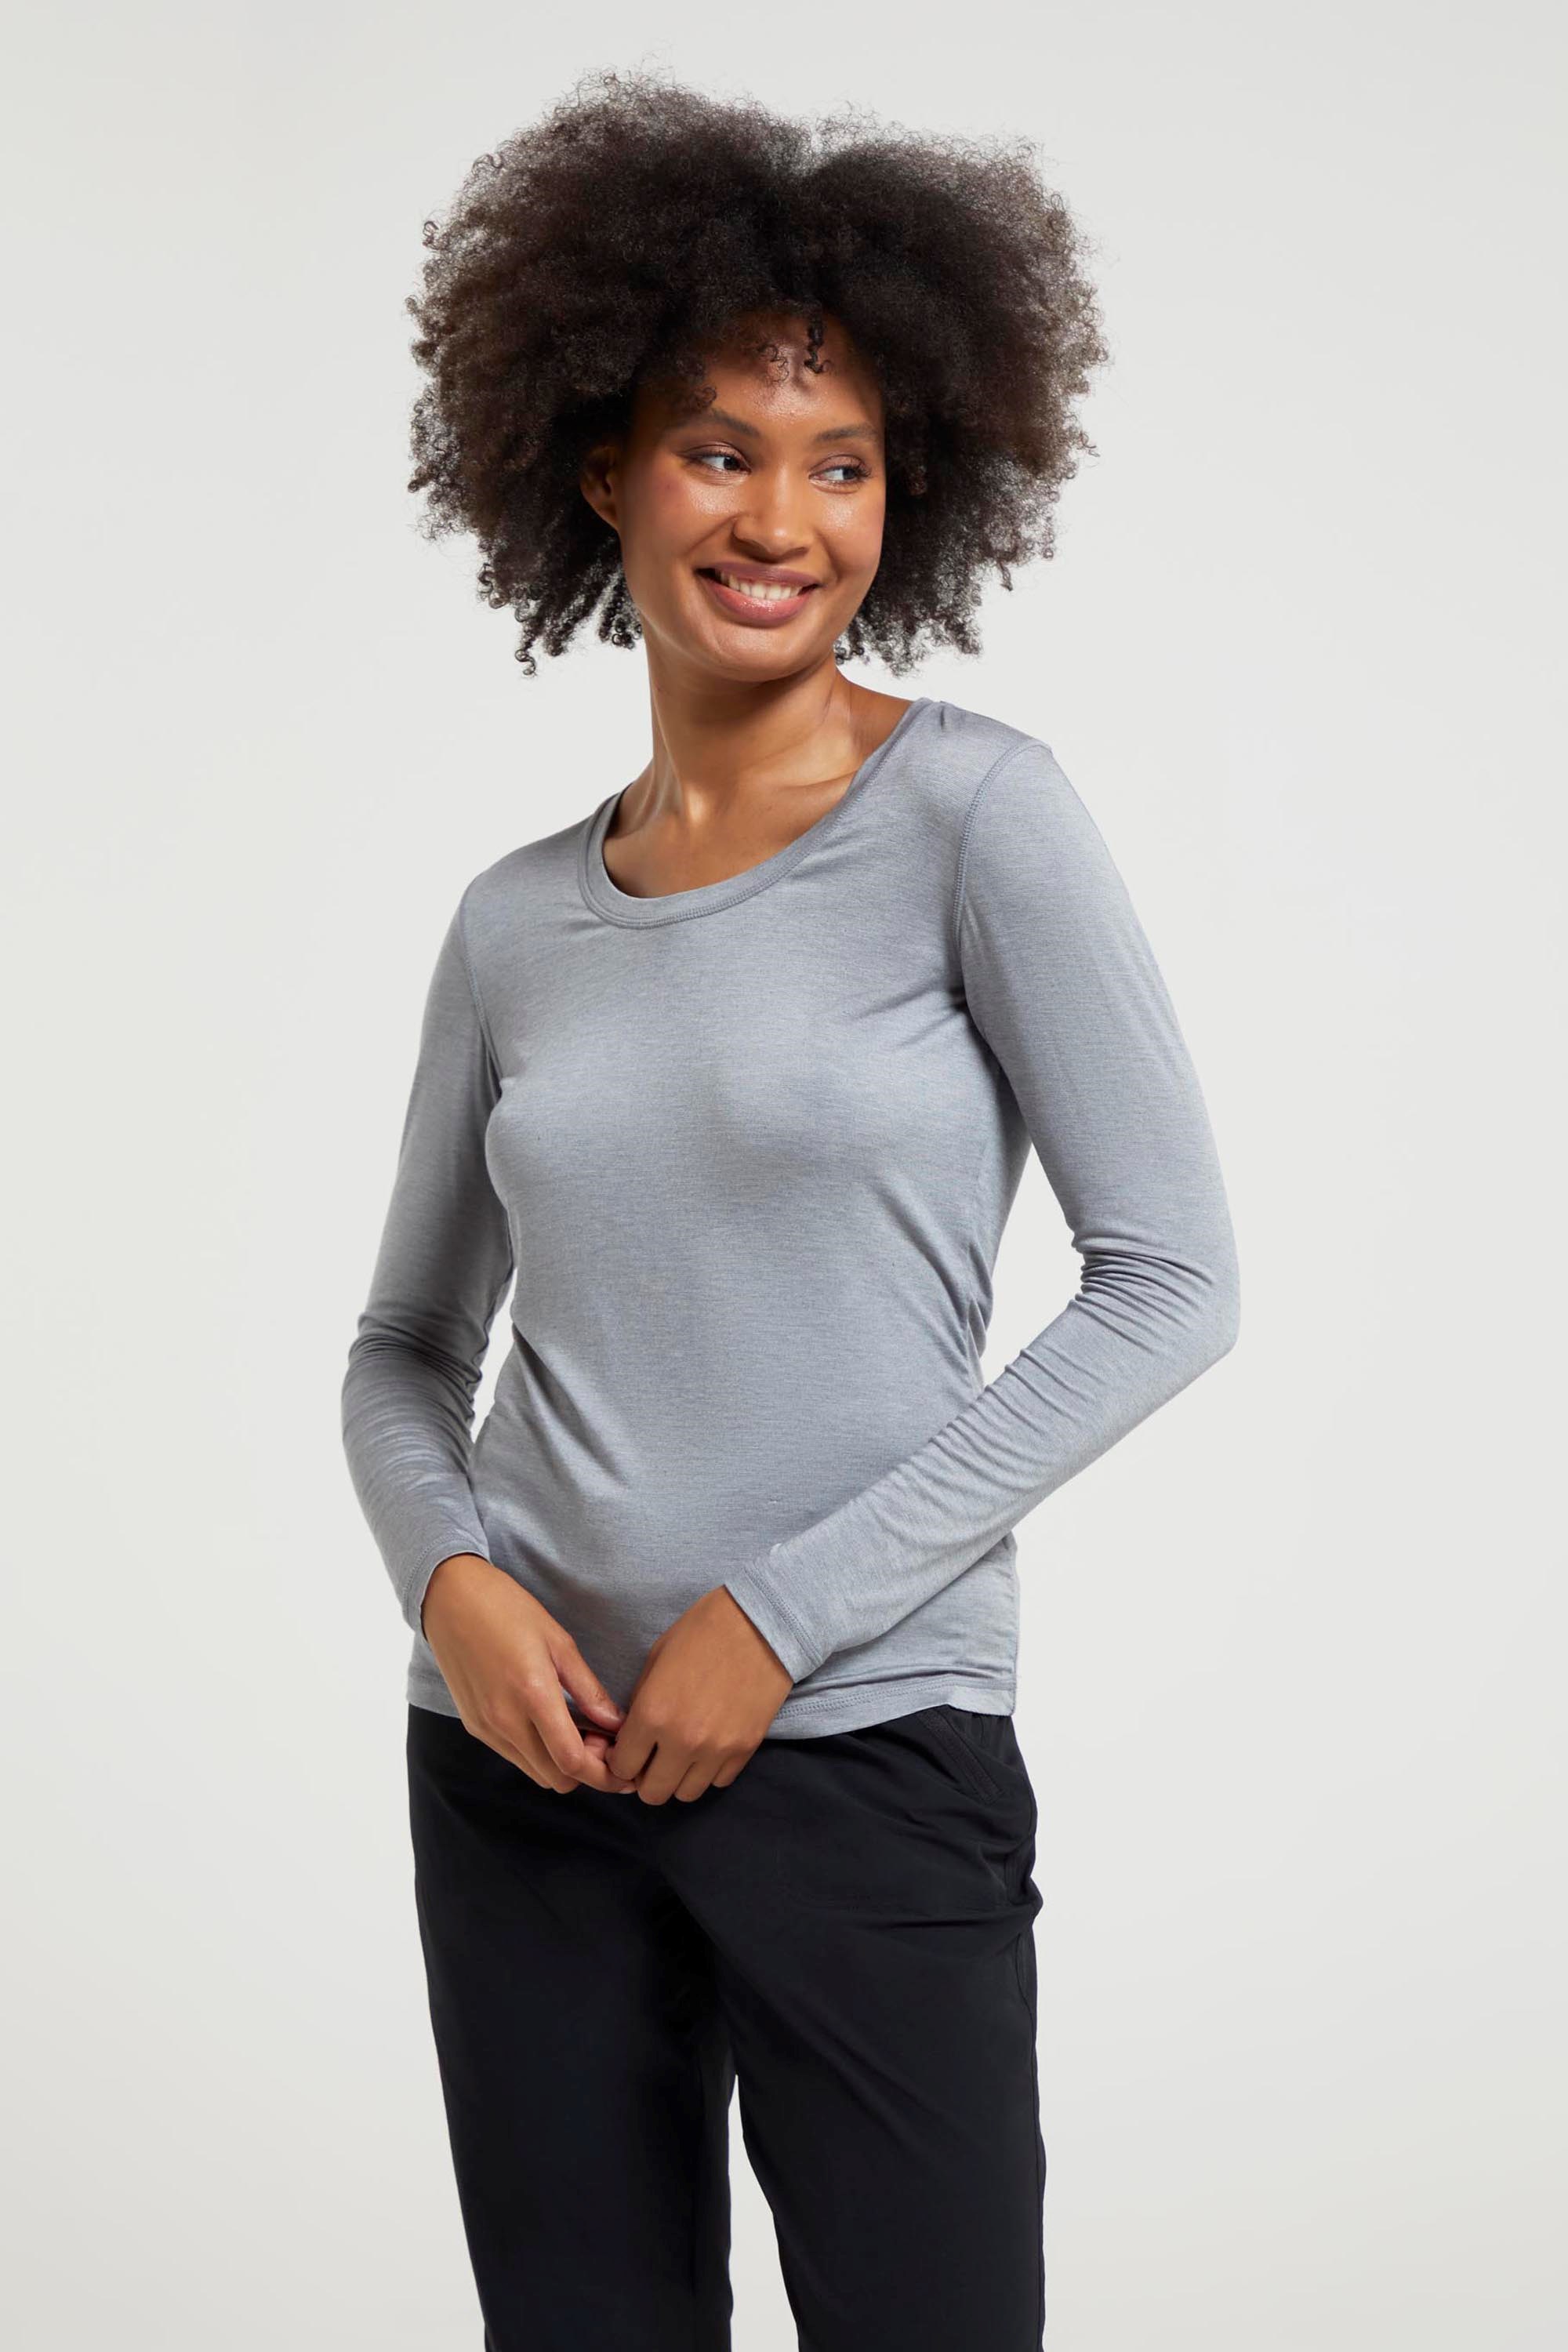 Ladies Thermal Top, Size : Small, Medium, Large, XL, Color : White